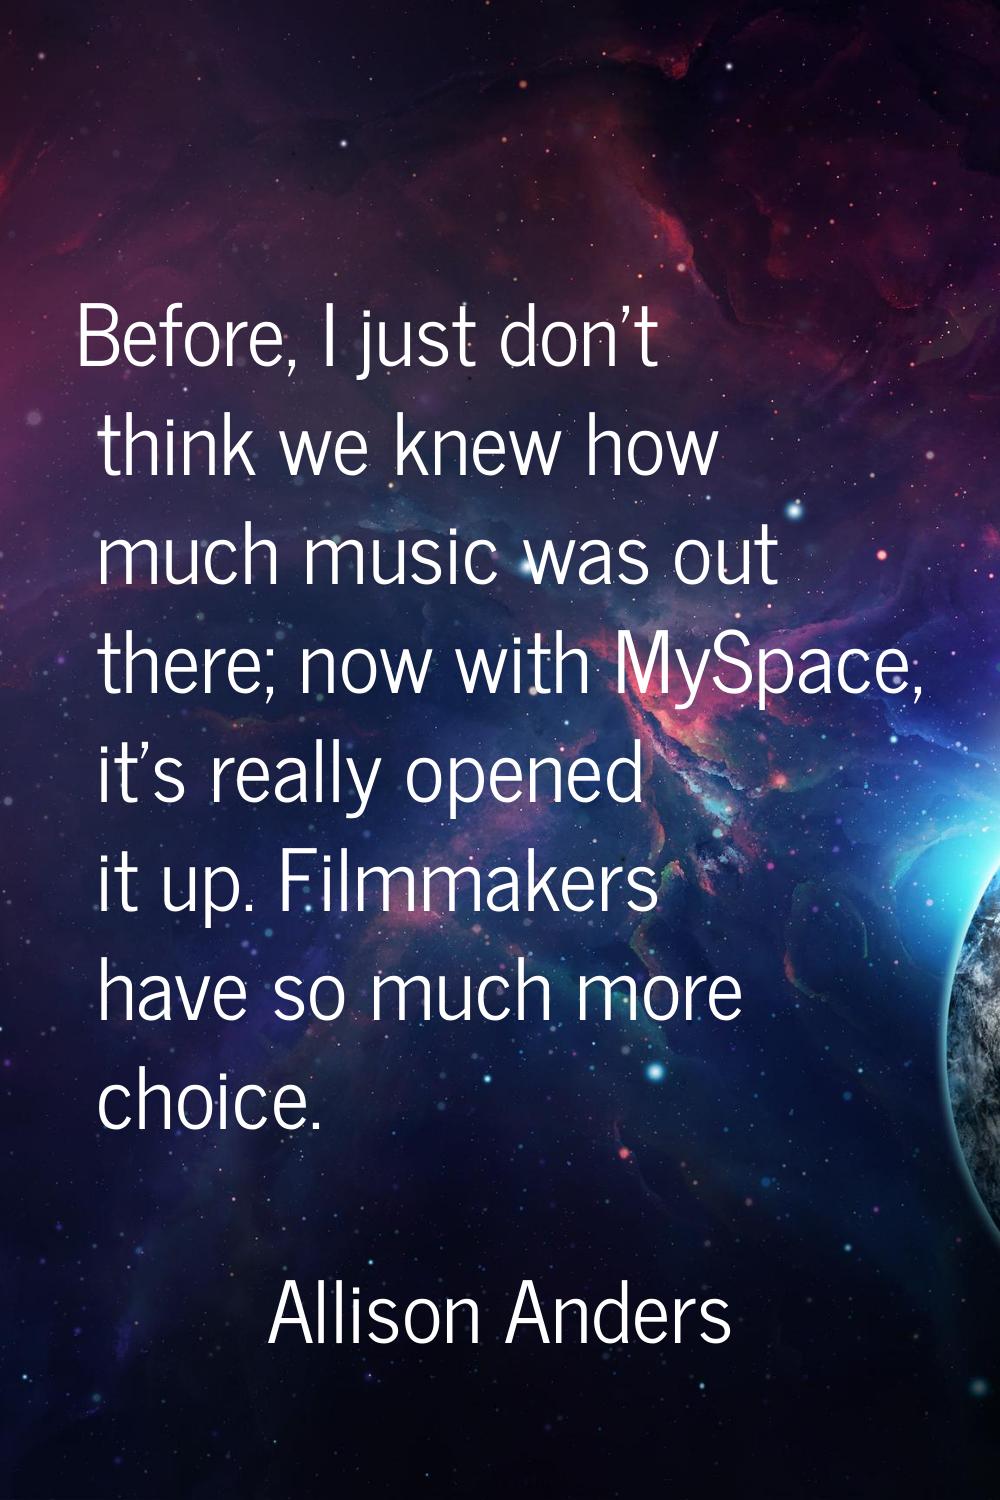 Before, I just don't think we knew how much music was out there; now with MySpace, it's really open